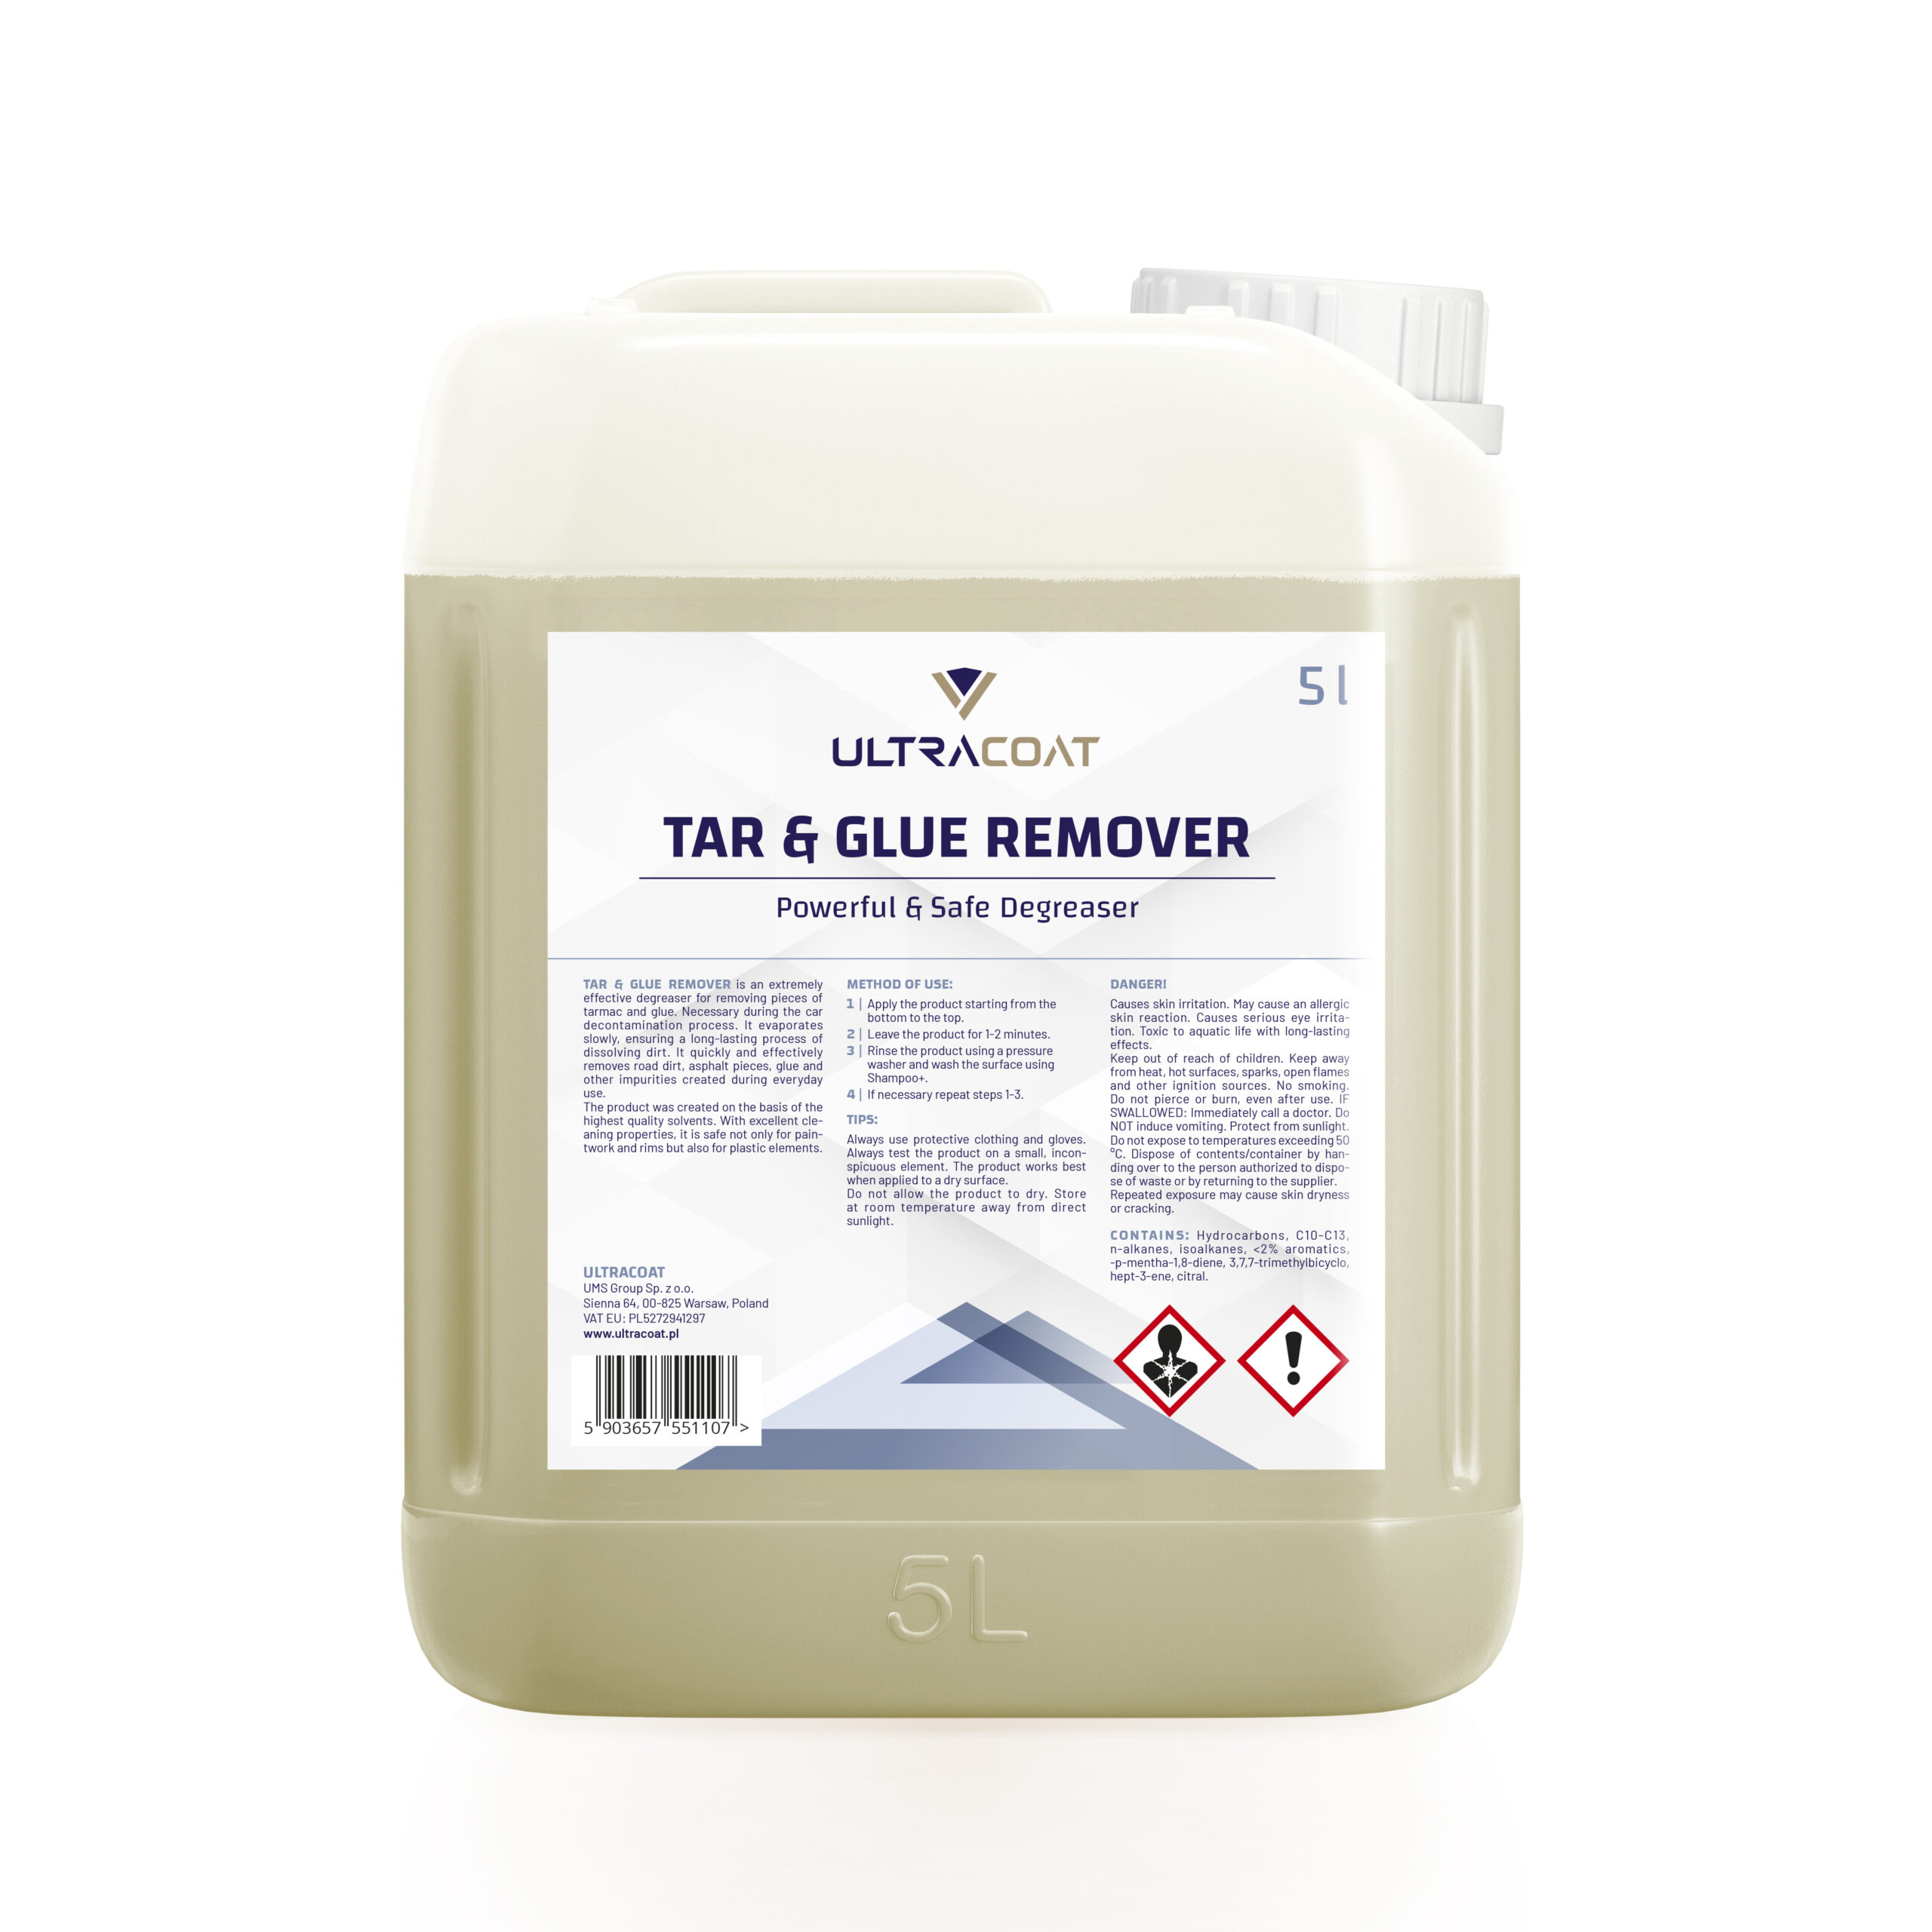 The Best Tar and Glue Remover for Cars 